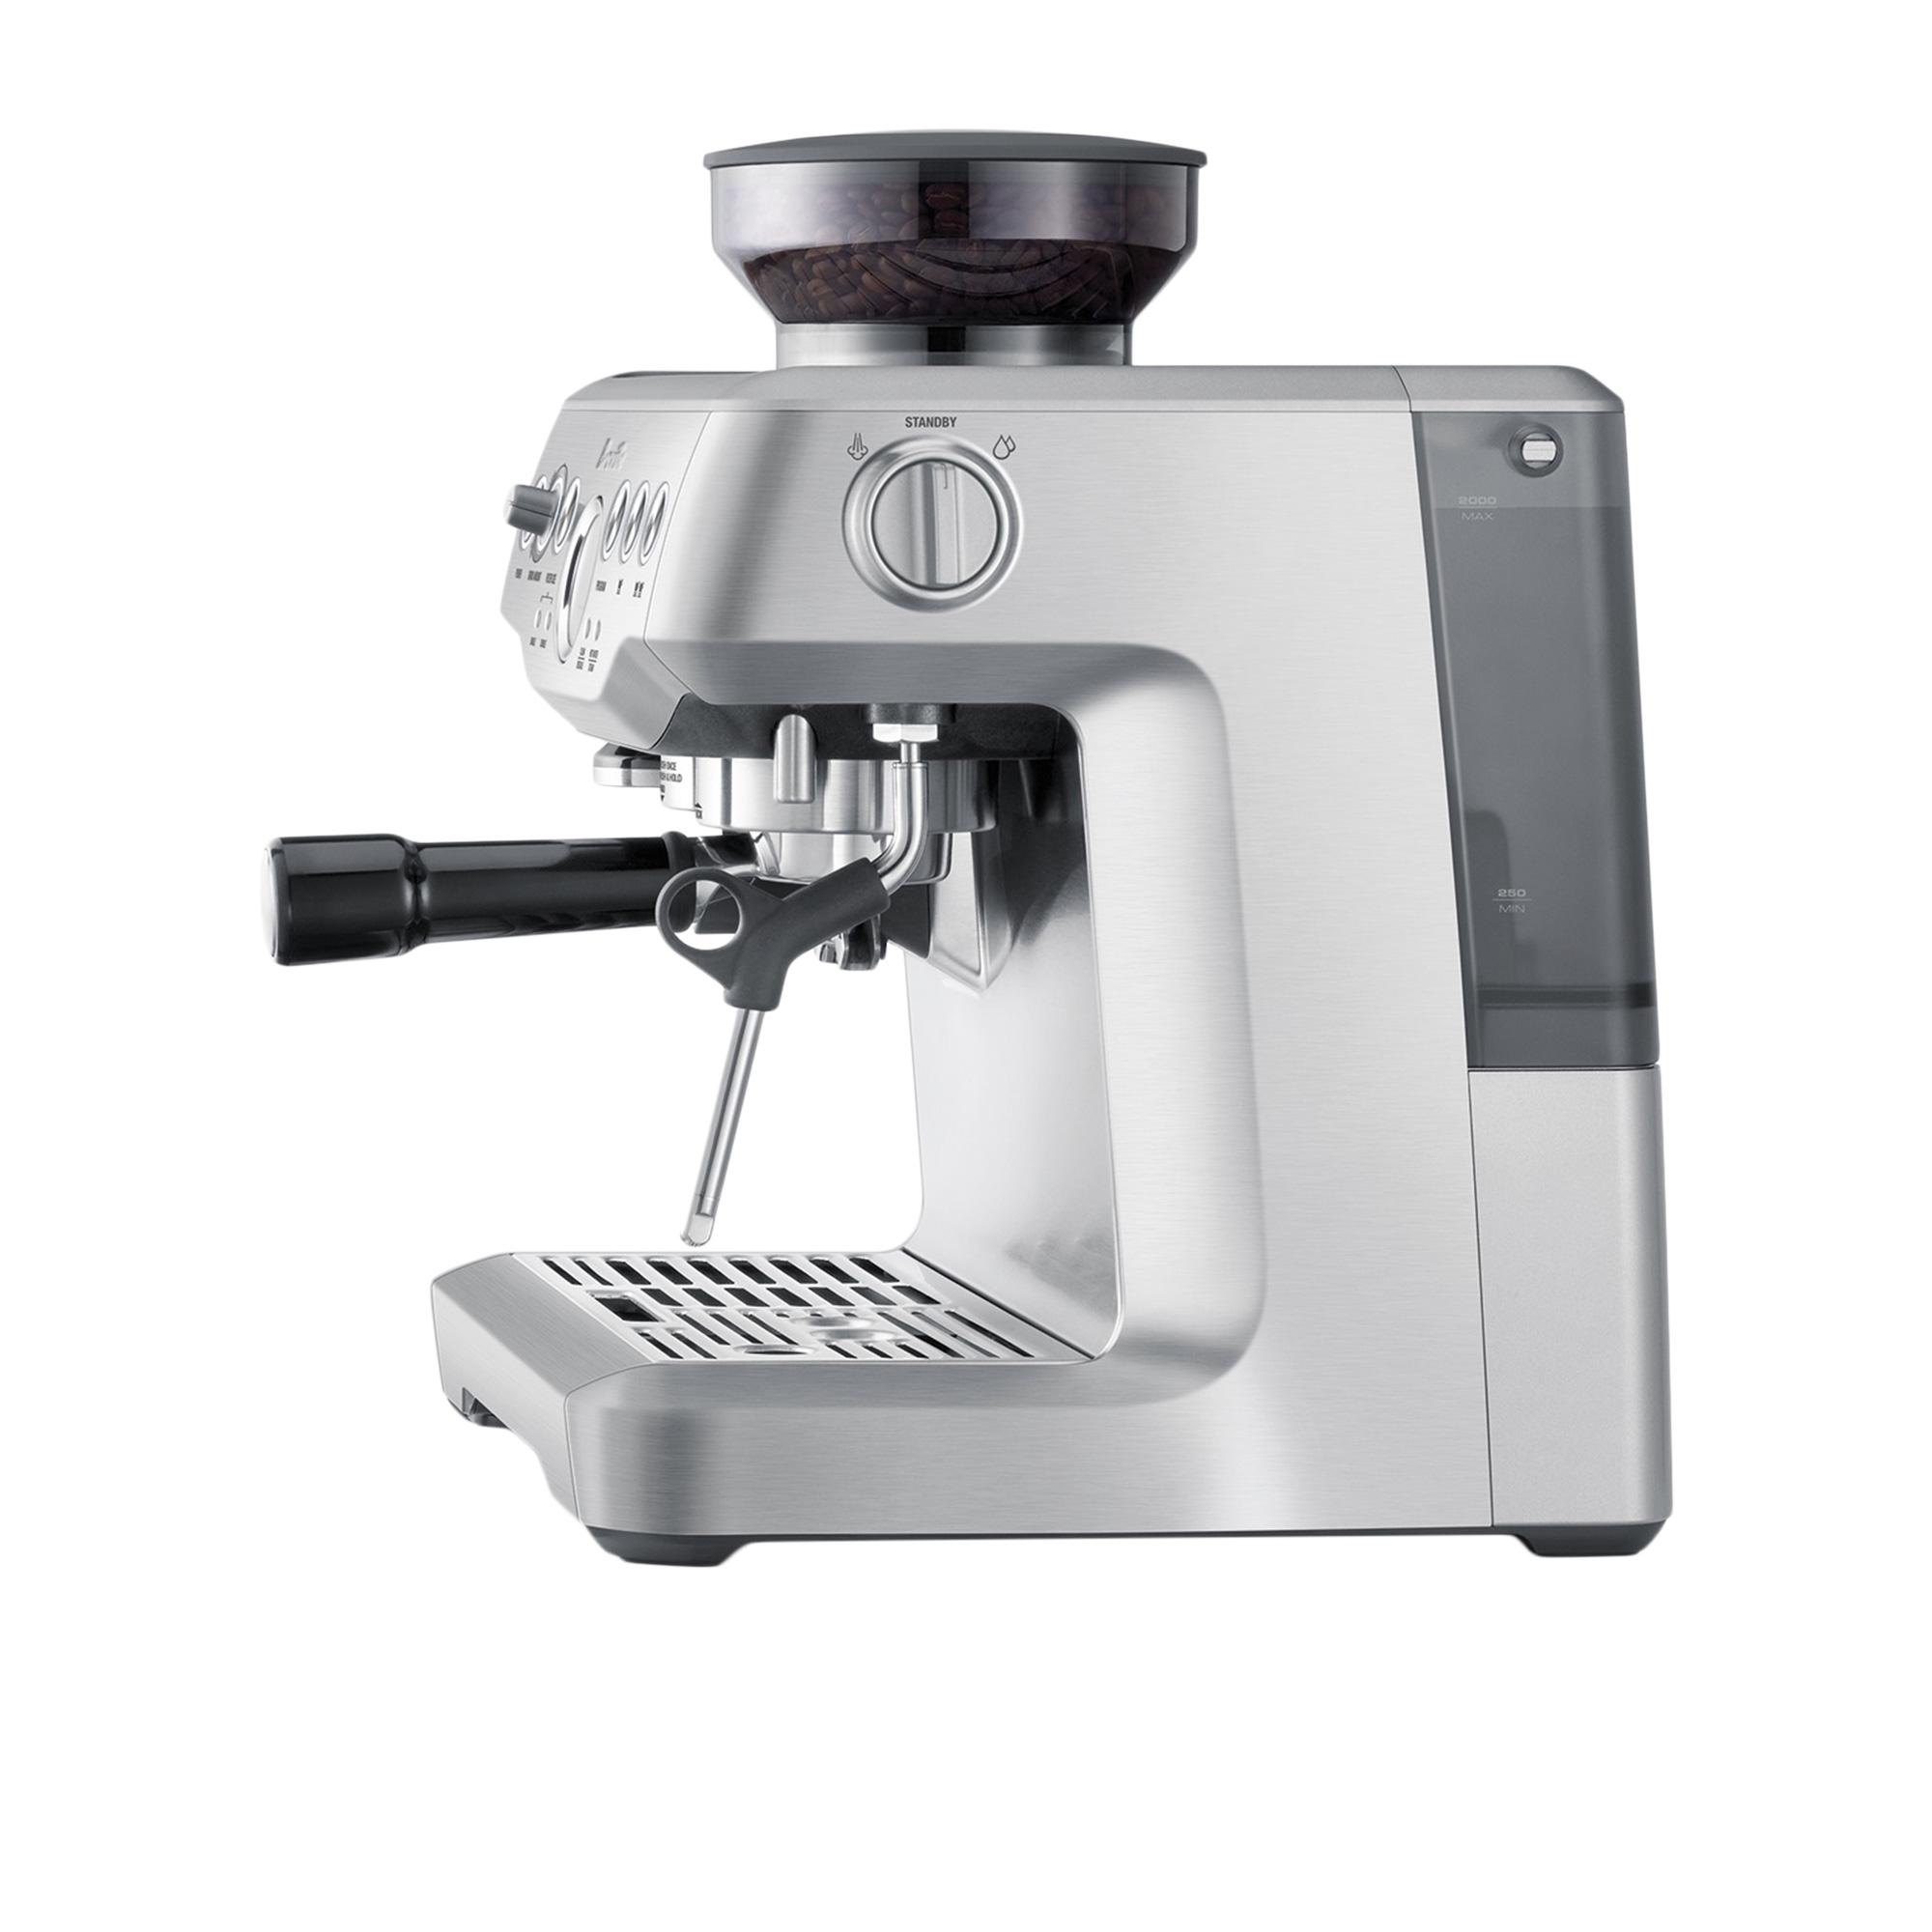 Breville The Barista Express Espresso Machine Brushed Stainless Steel Image 5